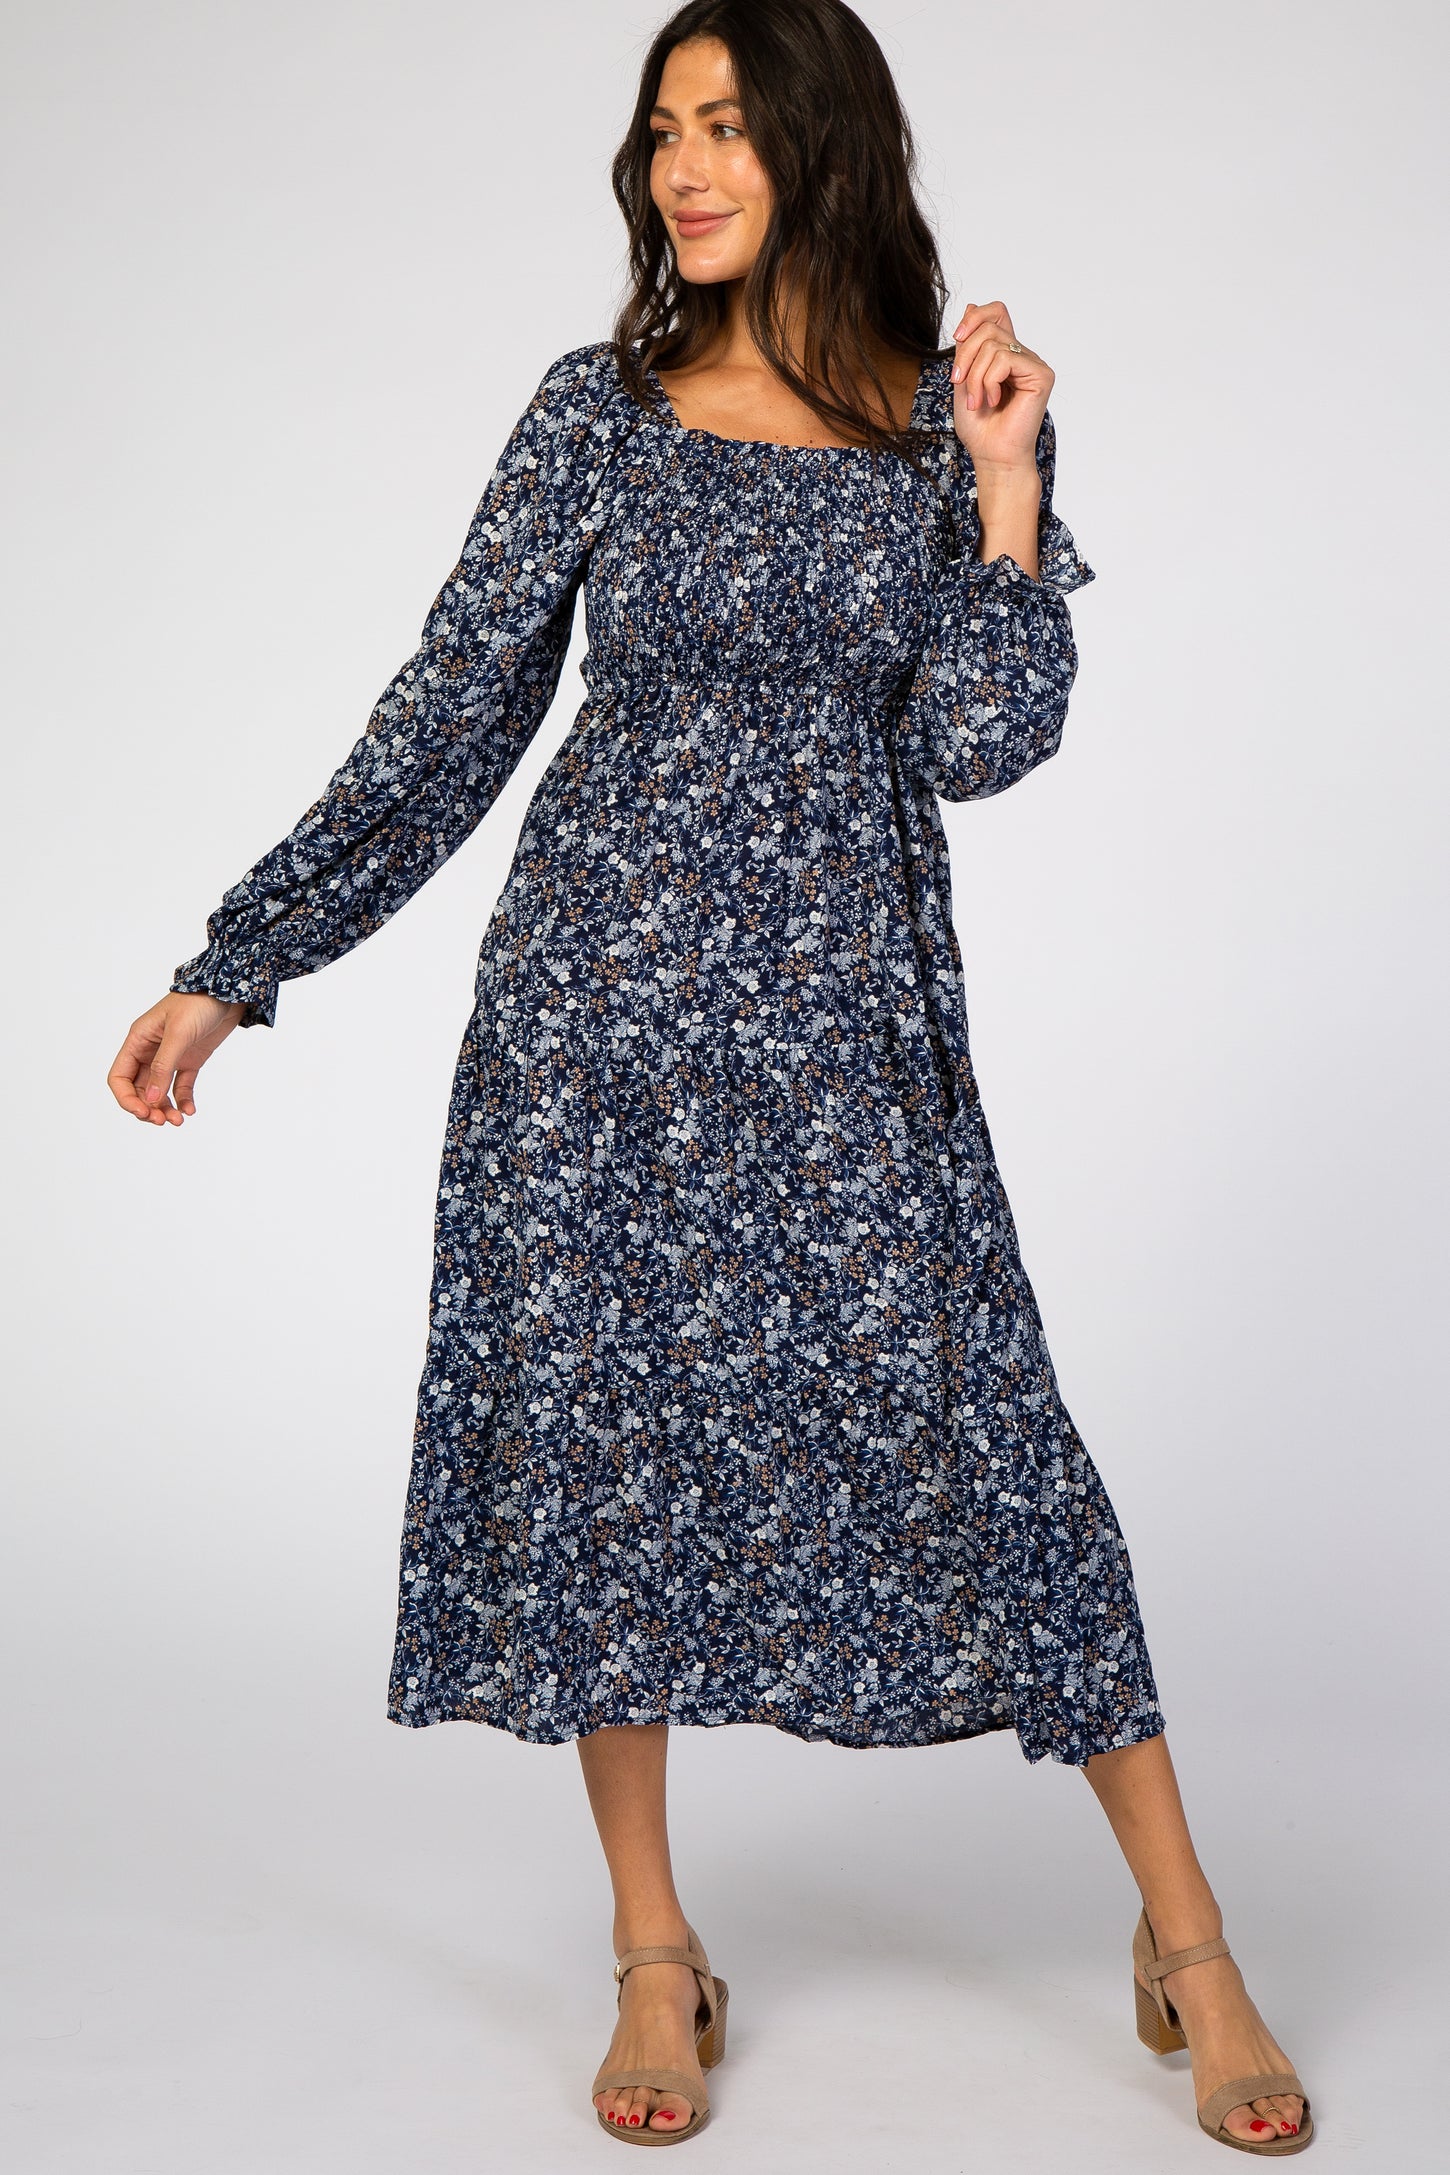 Navy Blue Floral Square Neck Smocked Maternity Maxi Dress